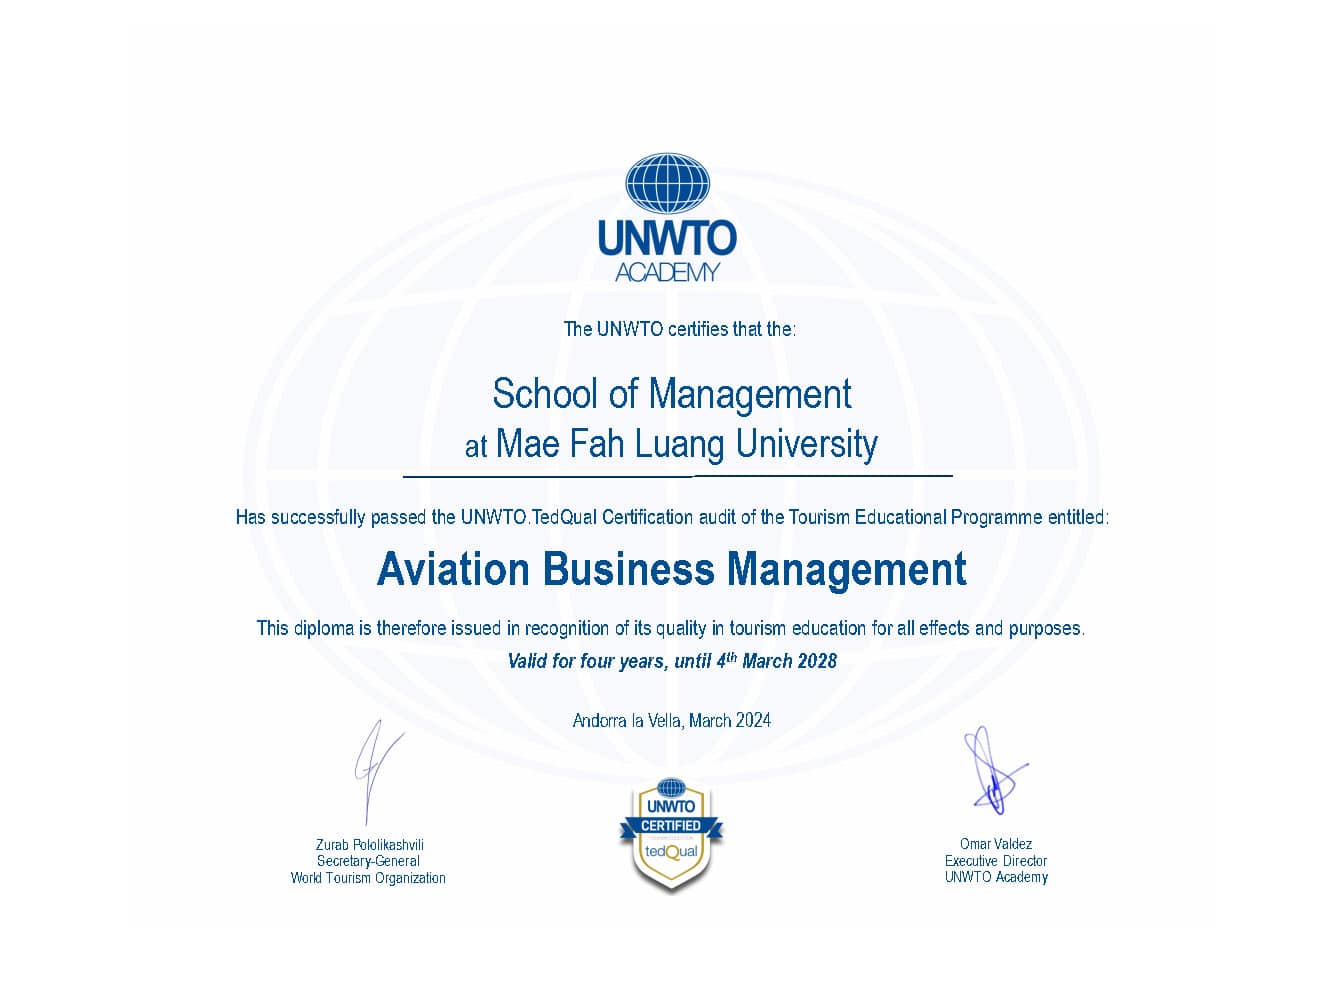 Mae Fah Luang University's School of Management Achieves UNWTO.TedQual Certification